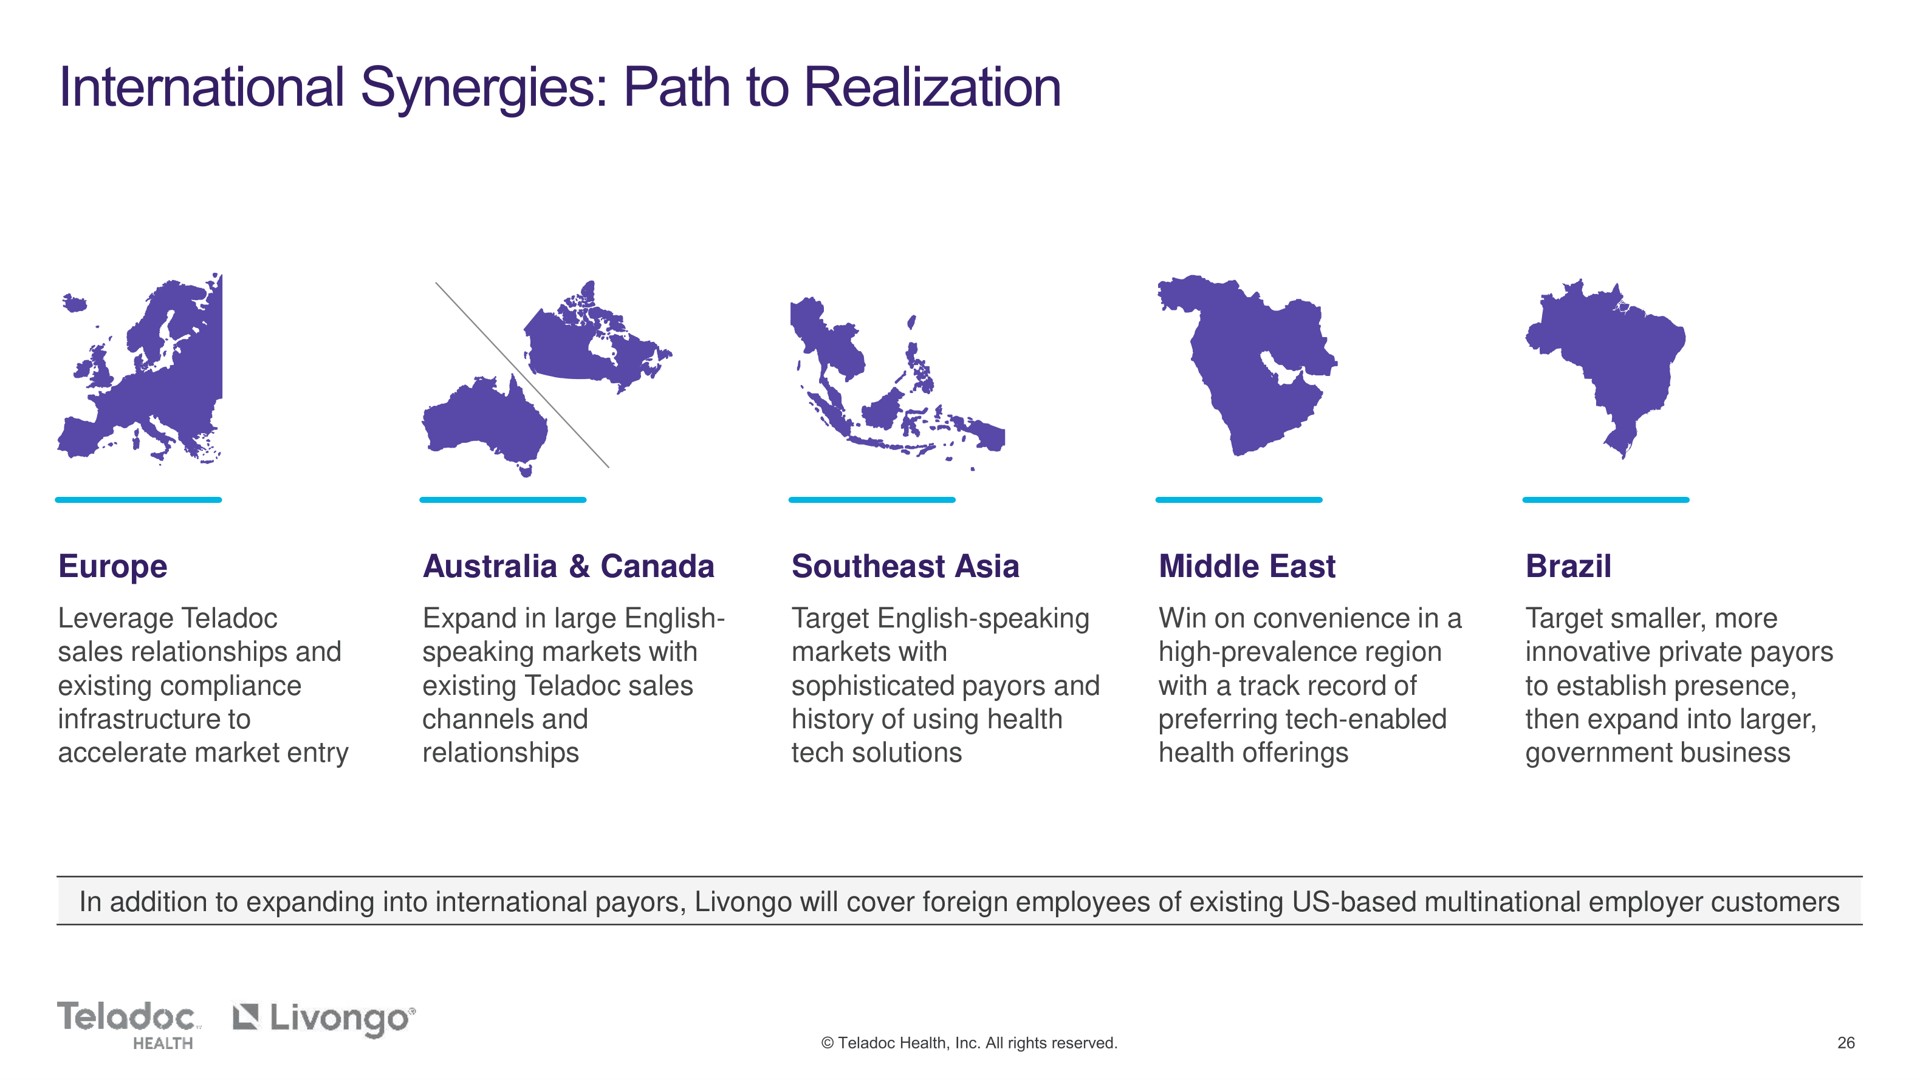 canada southeast middle east brazil international synergies path to realization | Teladoc